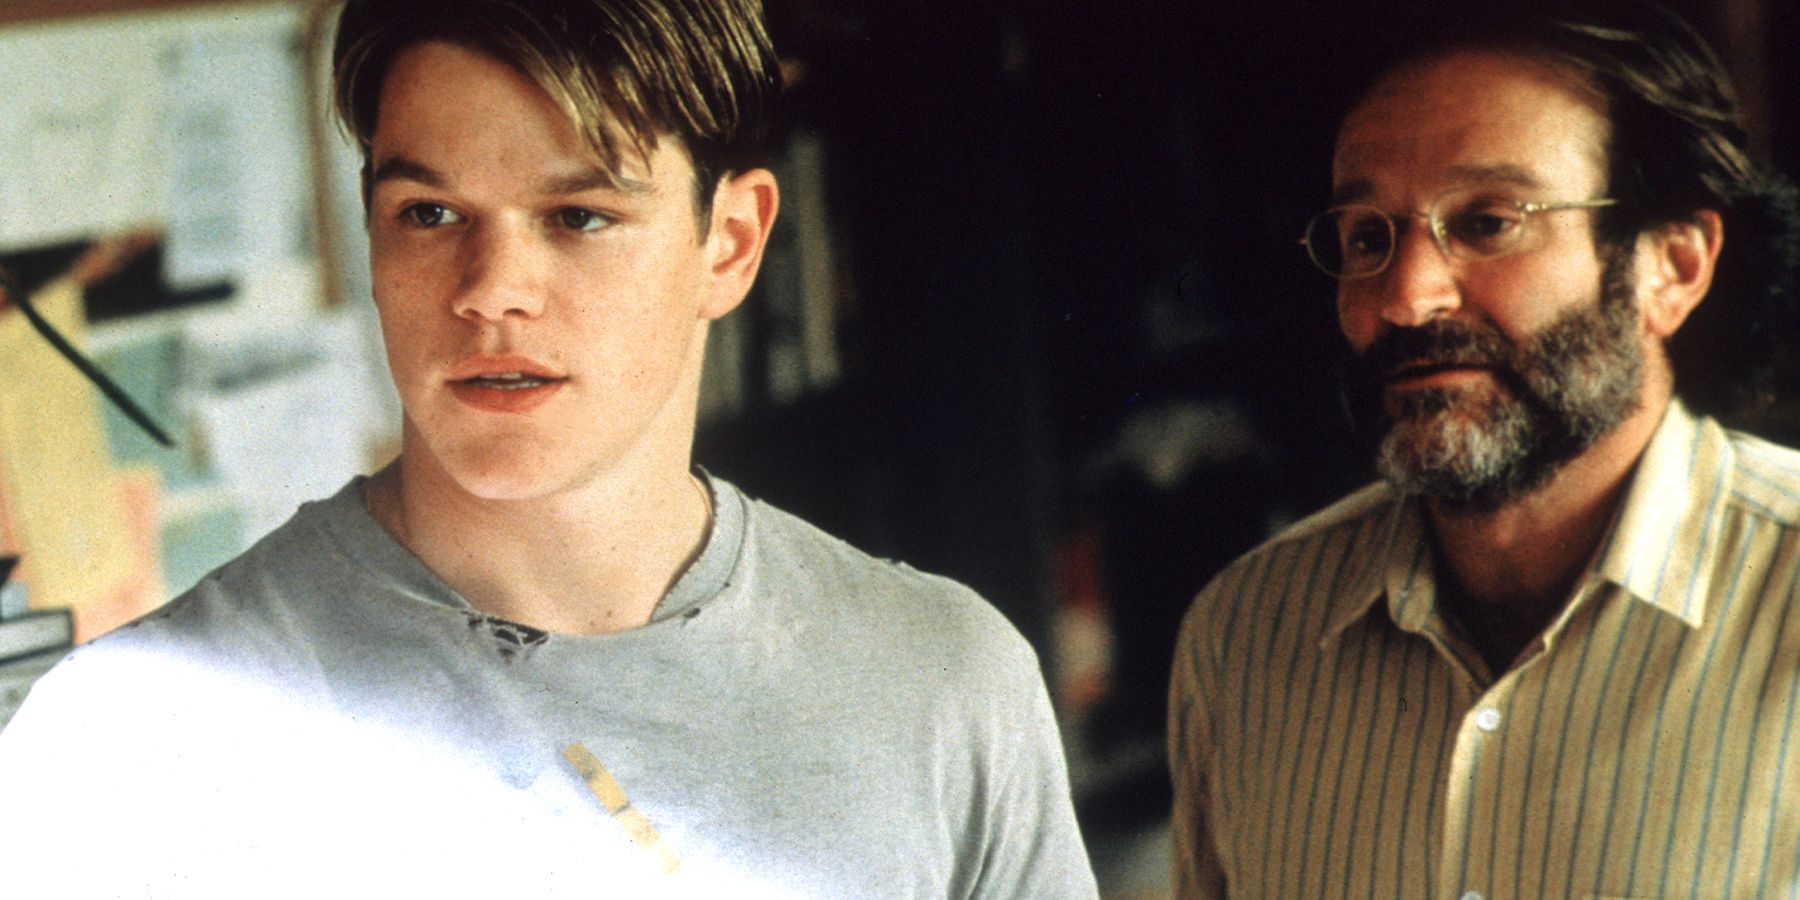 Will and Sean in Good Will Hunting